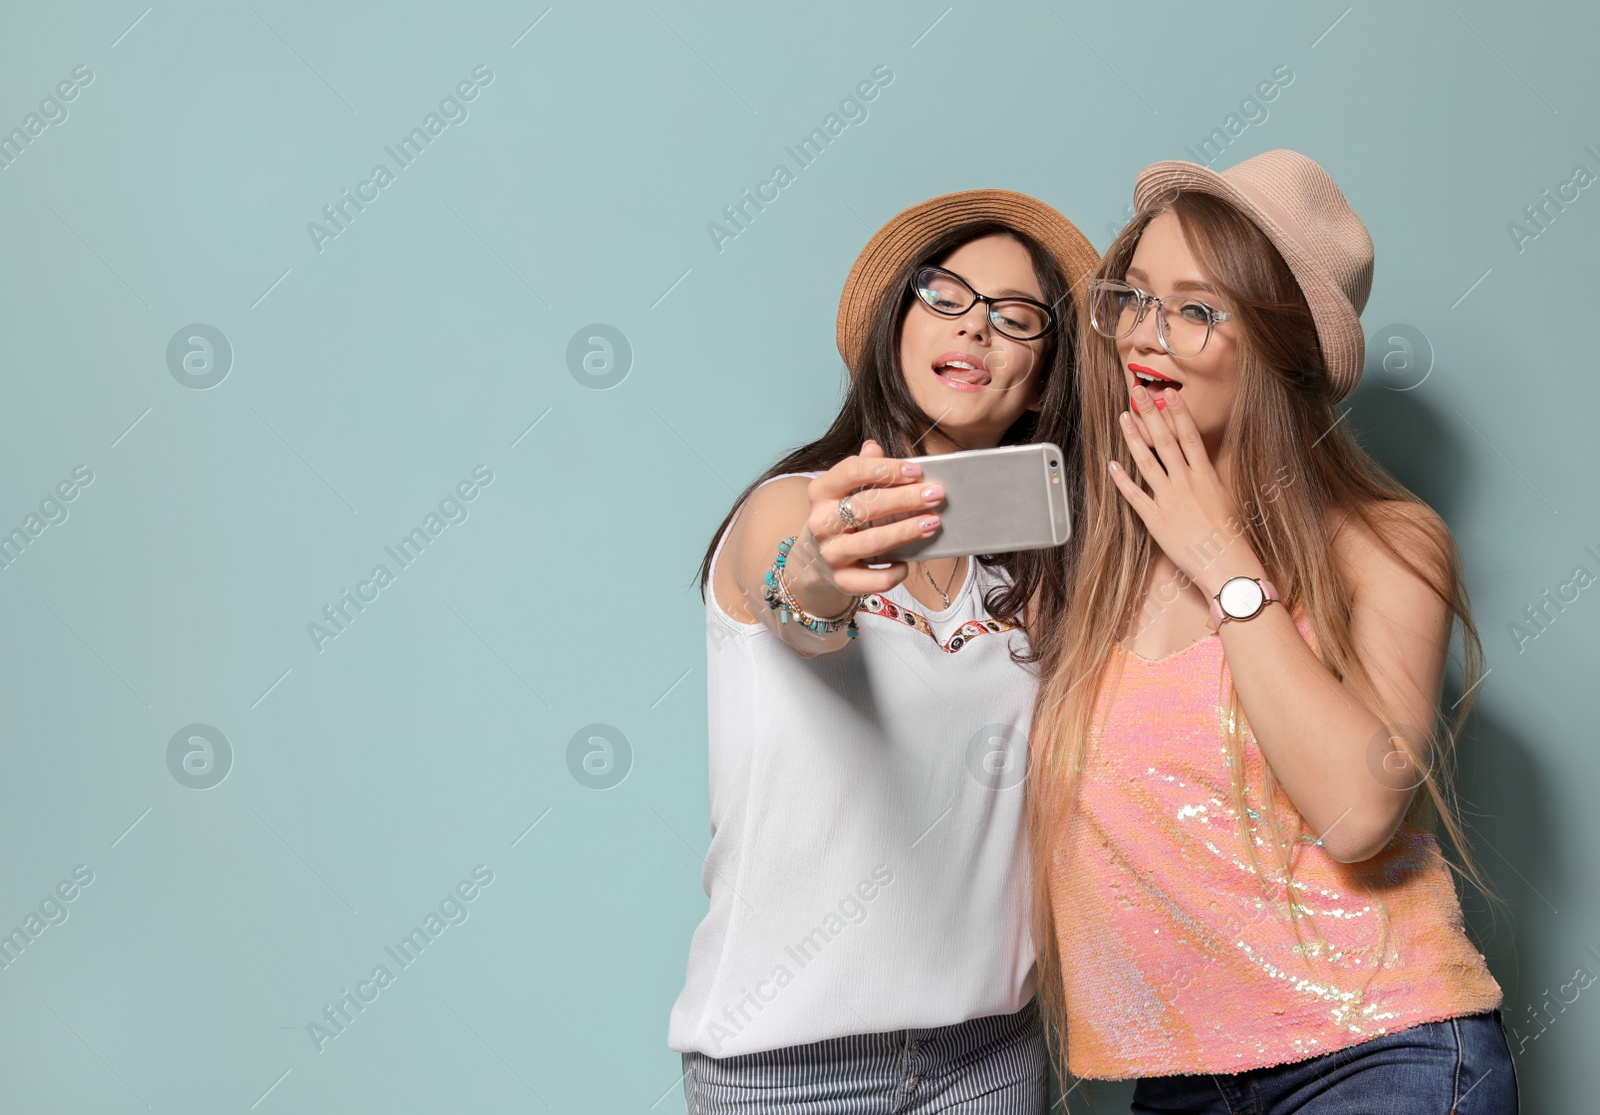 Photo of Attractive young women taking selfie on color background